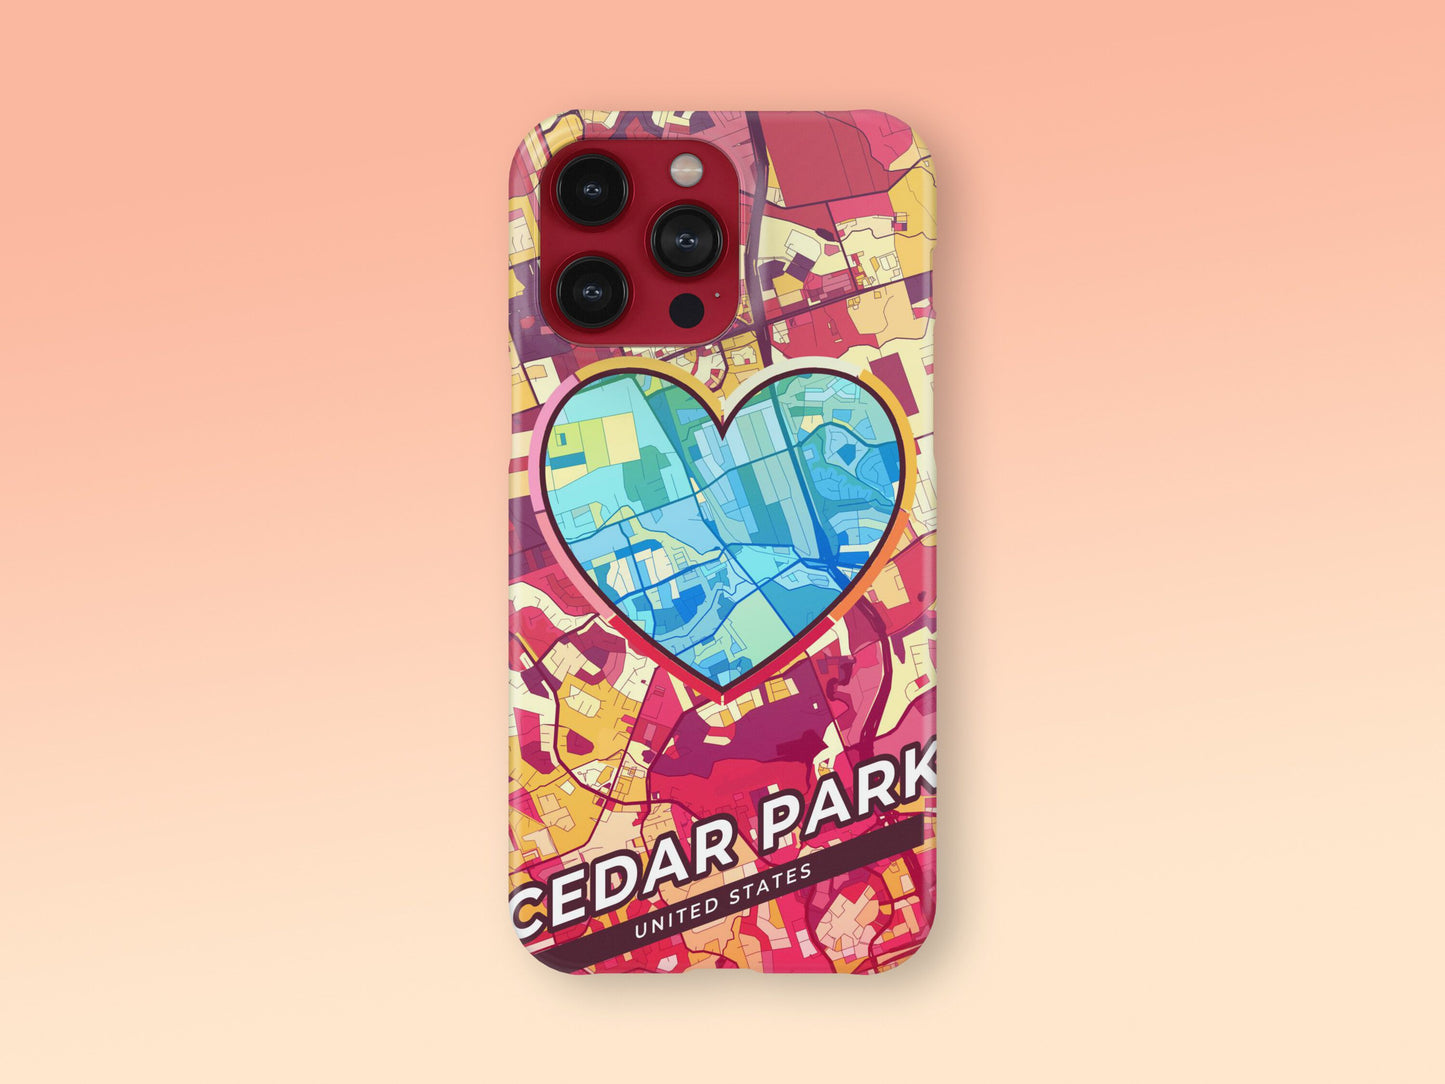 Cedar Park Texas slim phone case with colorful icon. Birthday, wedding or housewarming gift. Couple match cases. 2